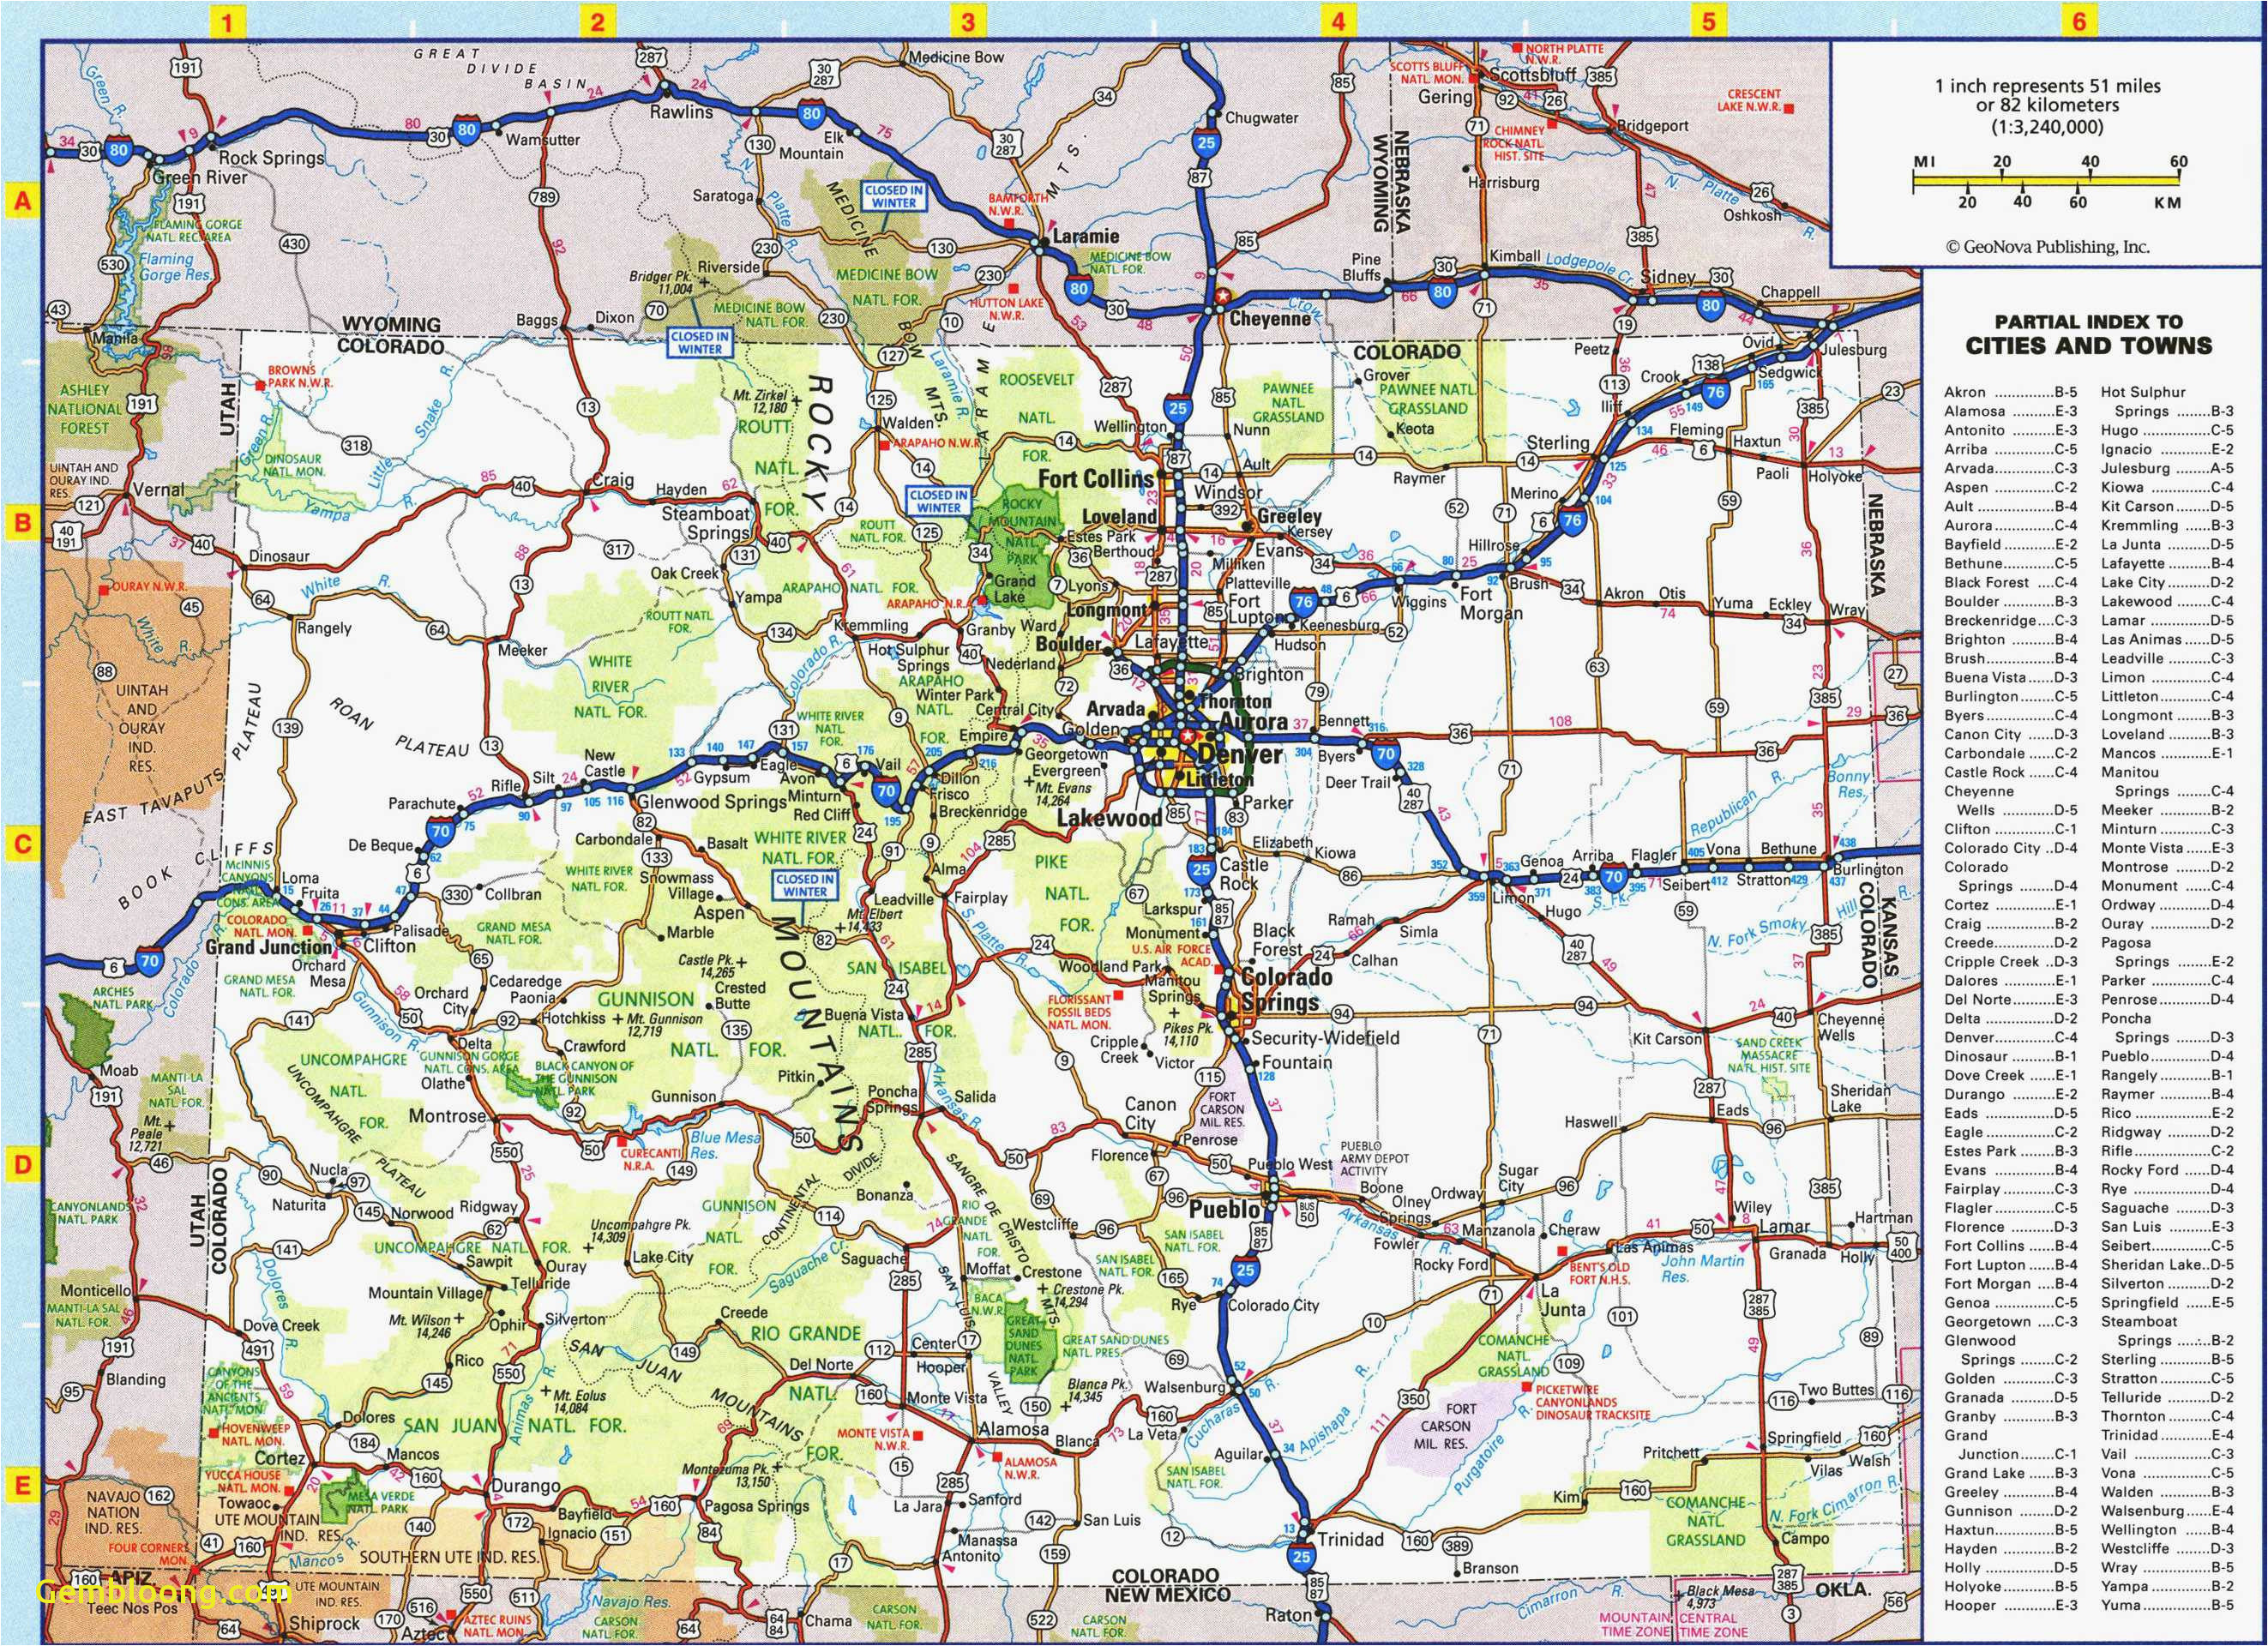 Colorado Road Maps Online Colorado Highway Map Awesome Colorado County Map with Roads Fresh